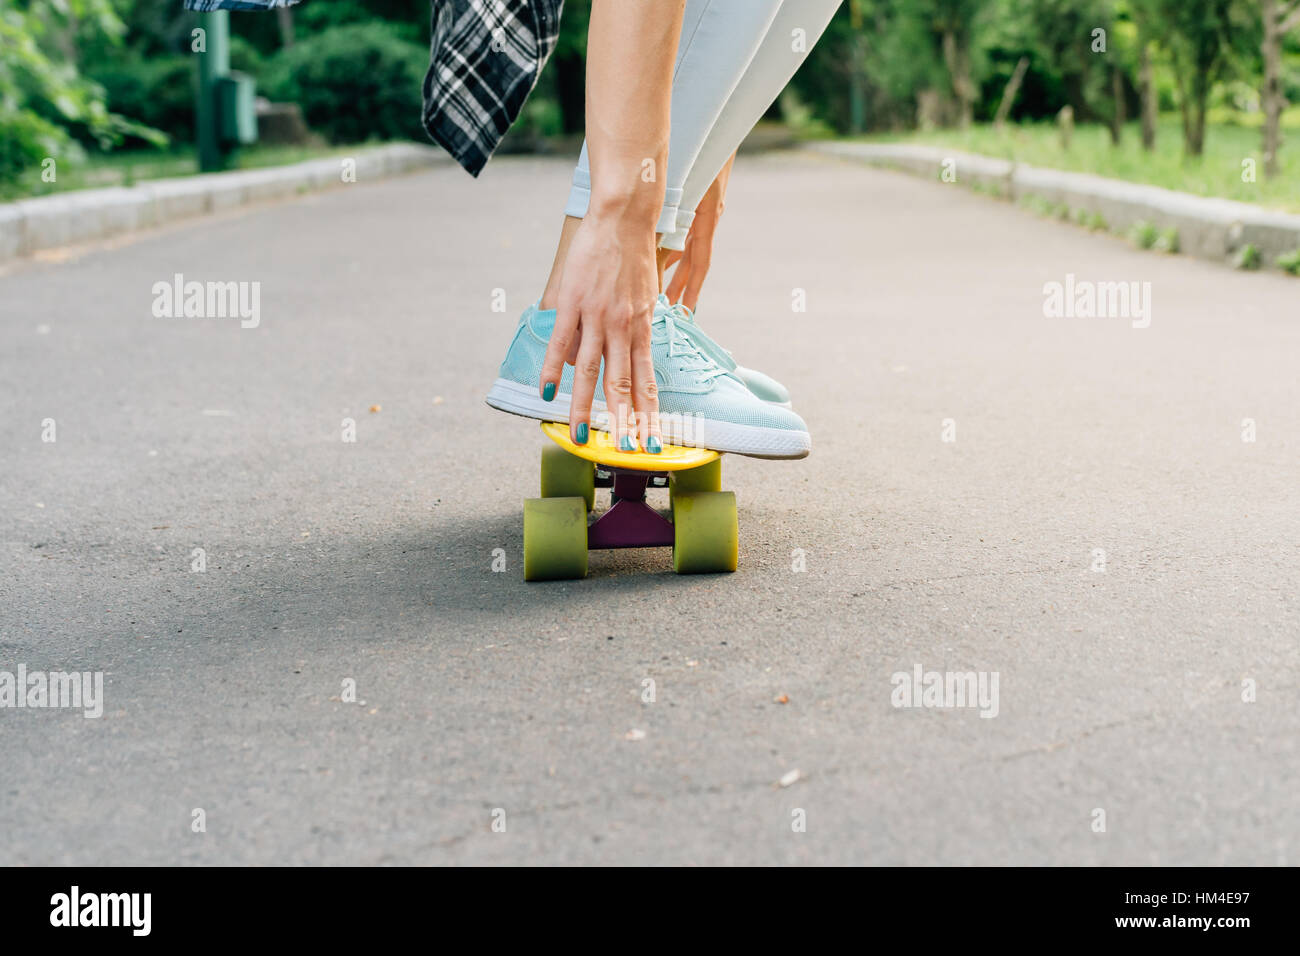 Girl rides on a skateboard on asphalt and holds balance. Active weekend in park summertime. Stock Photo